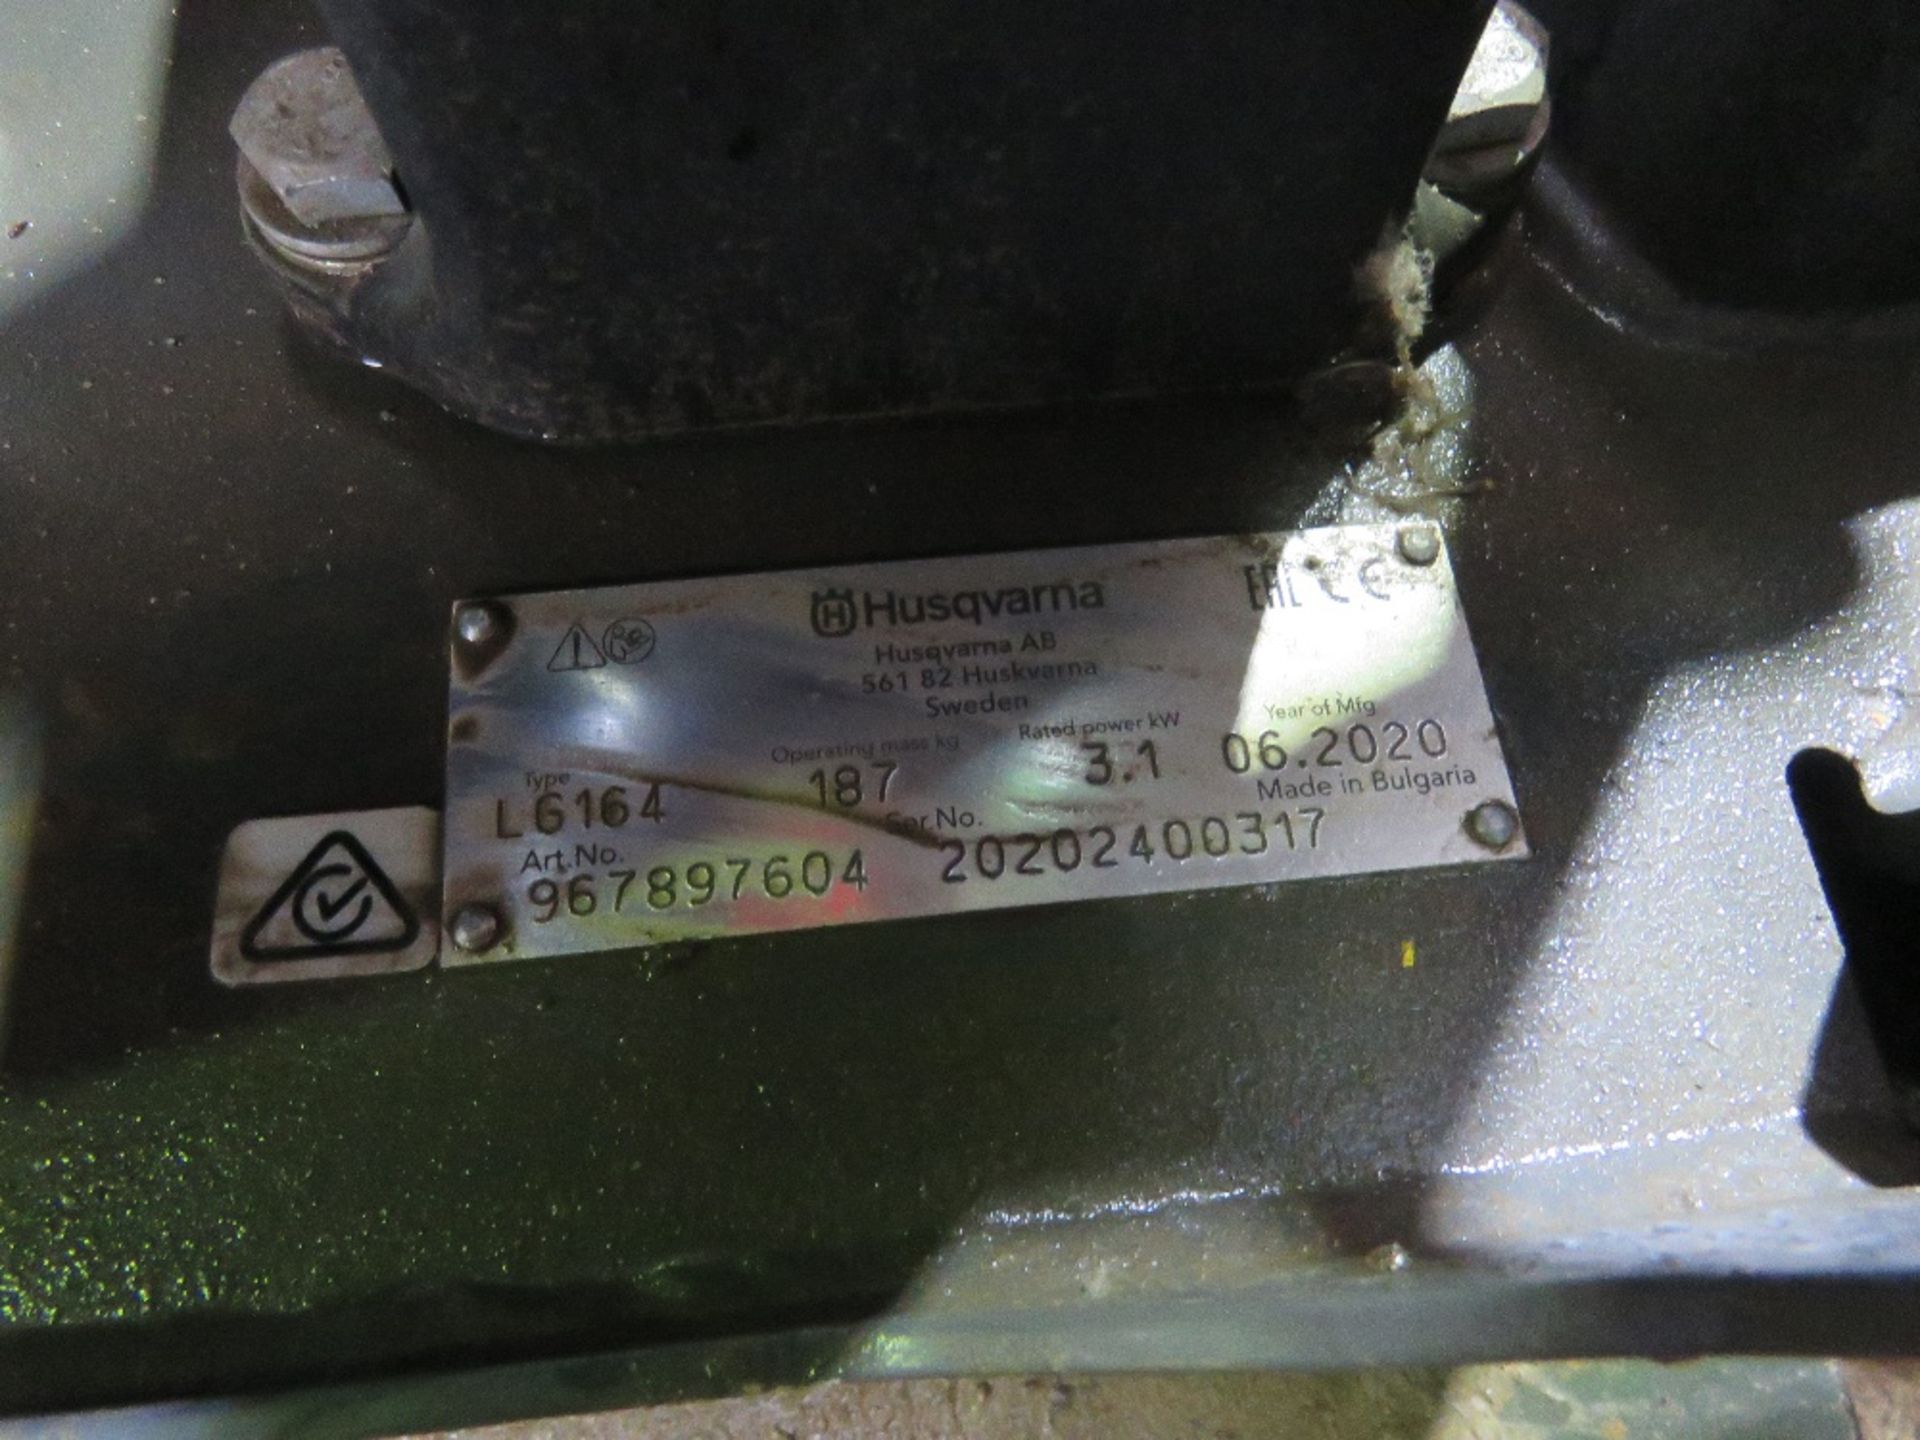 HUSQVARNA LG164 DIESEL ENGINED HEAVY DUTY COMPACTION PLATE, YEAR 2020. WHEN TESTED WAS SEEN TO RUN A - Image 4 of 4